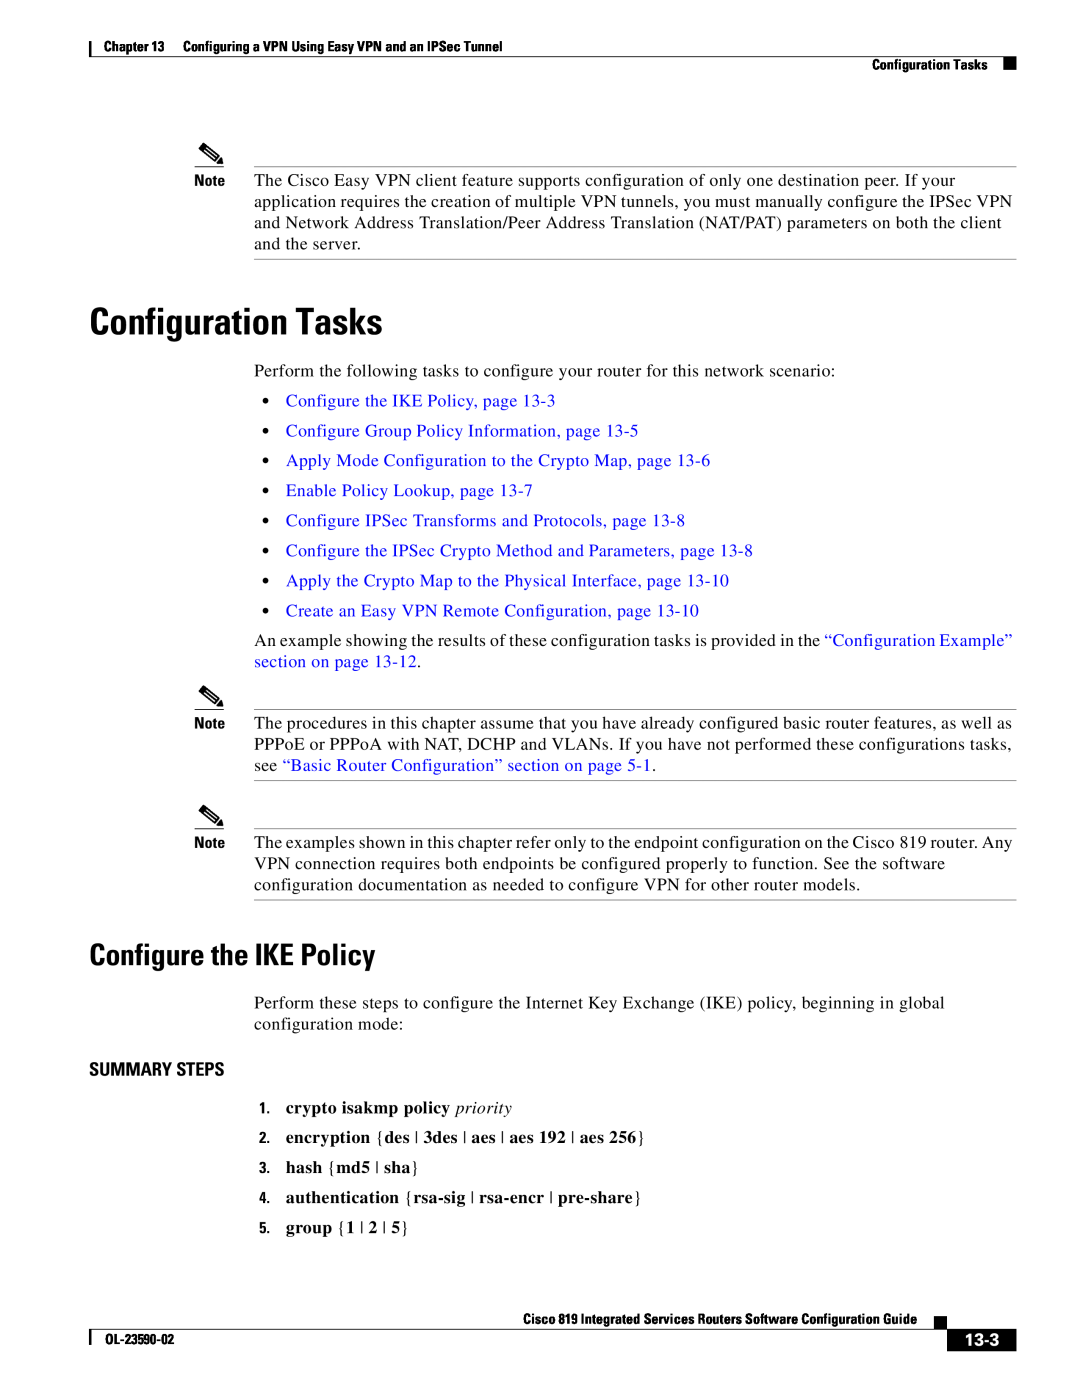 Cisco Systems C819HG4GVK9 Configure the IKE Policy, Create an Easy VPN Remote Configuration, page, 13-3, Summary Steps 